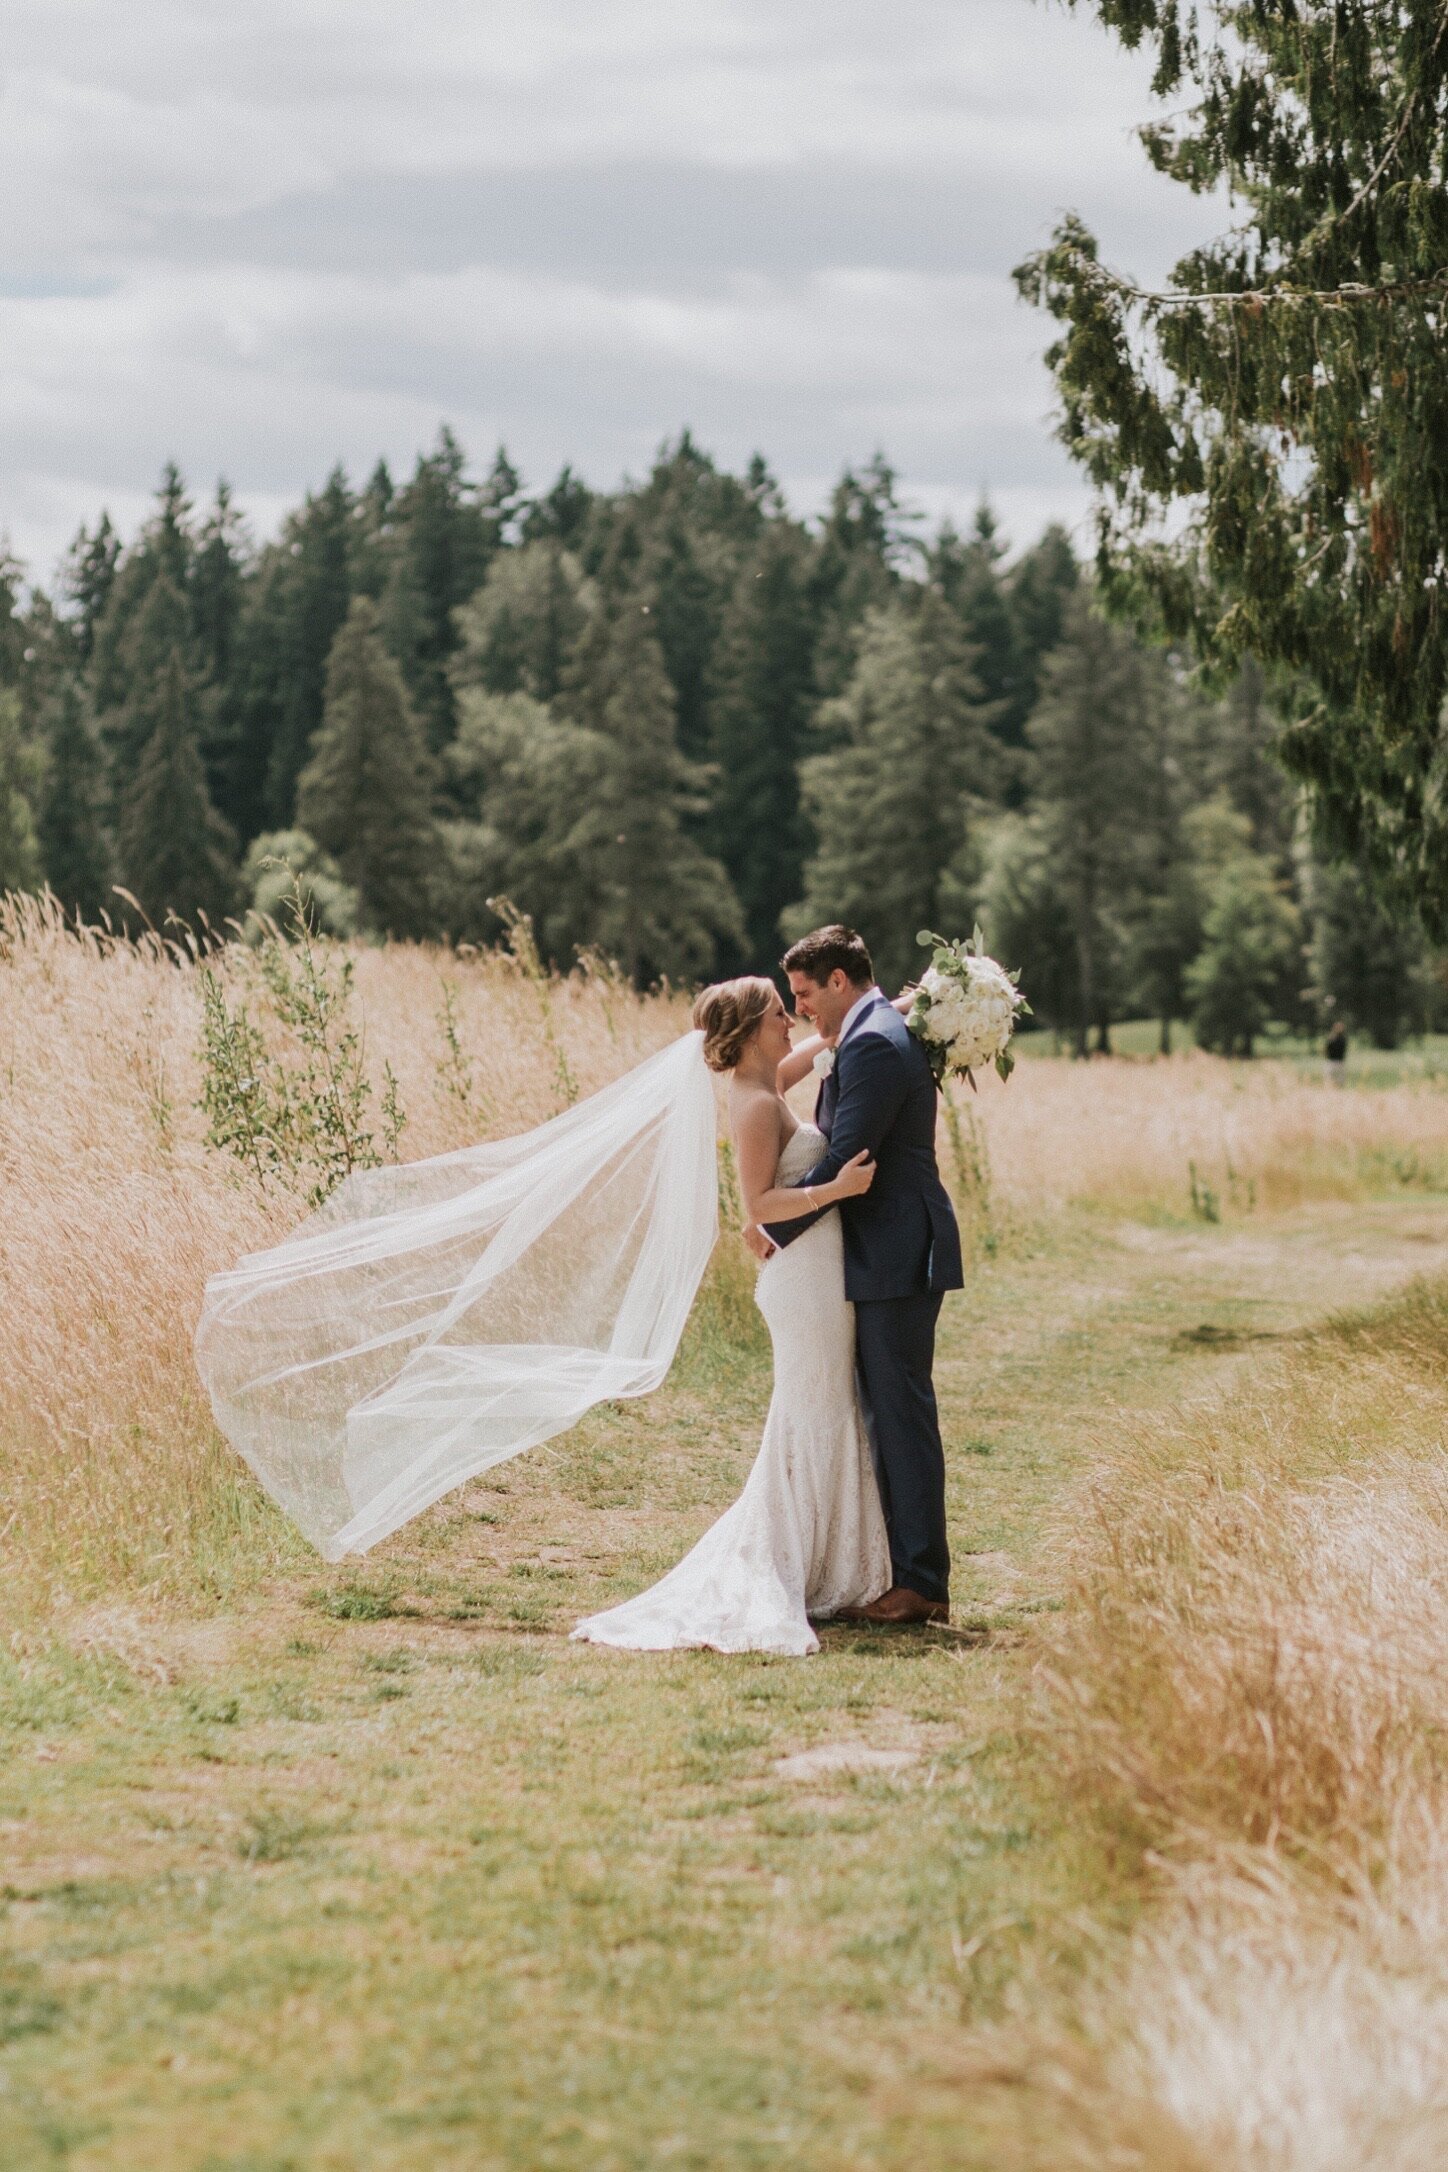 Real bride and groom with a blowing veil and standing in a field